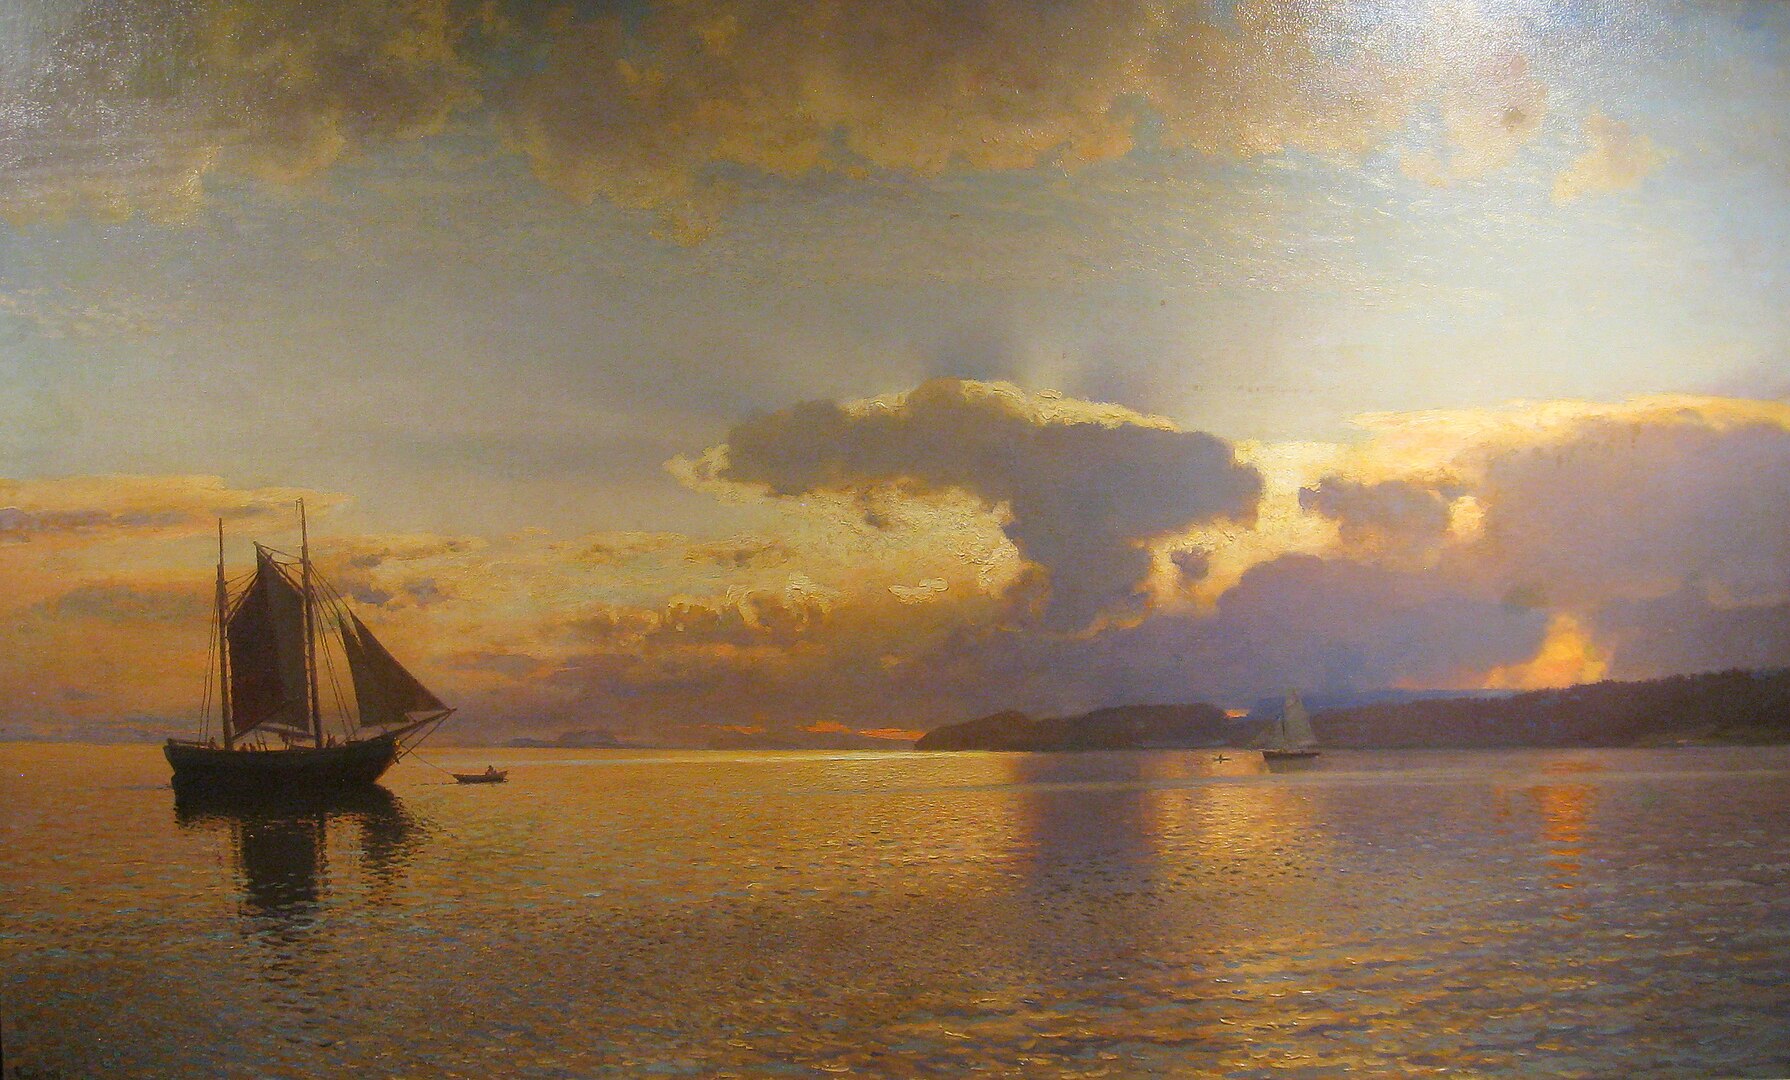 A landscape view of an ocean with several sailboats at sunset